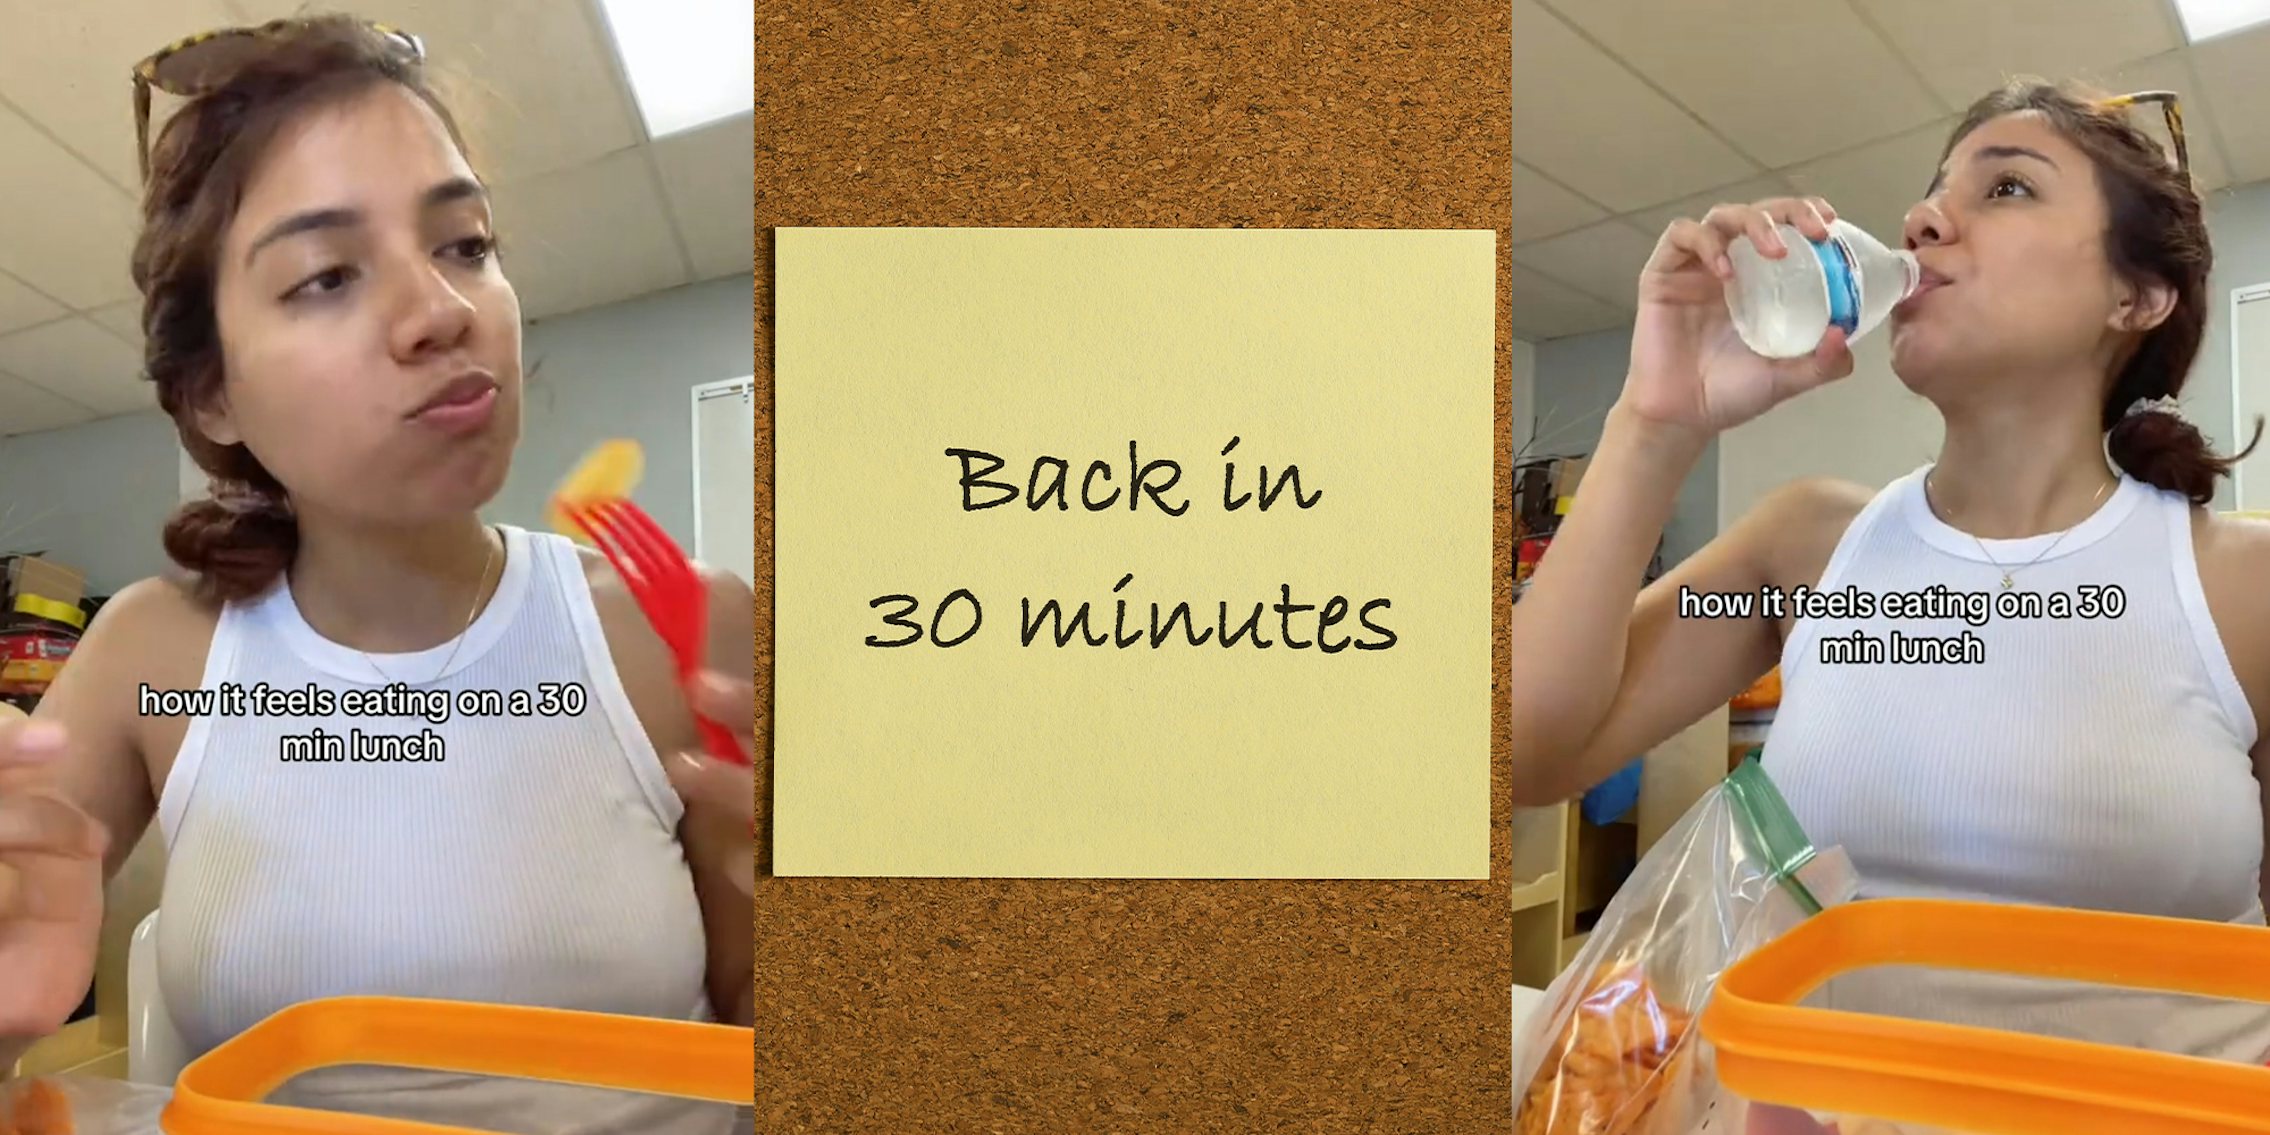 Worker shares what it's like to eat in only 30 minutes for lunch break